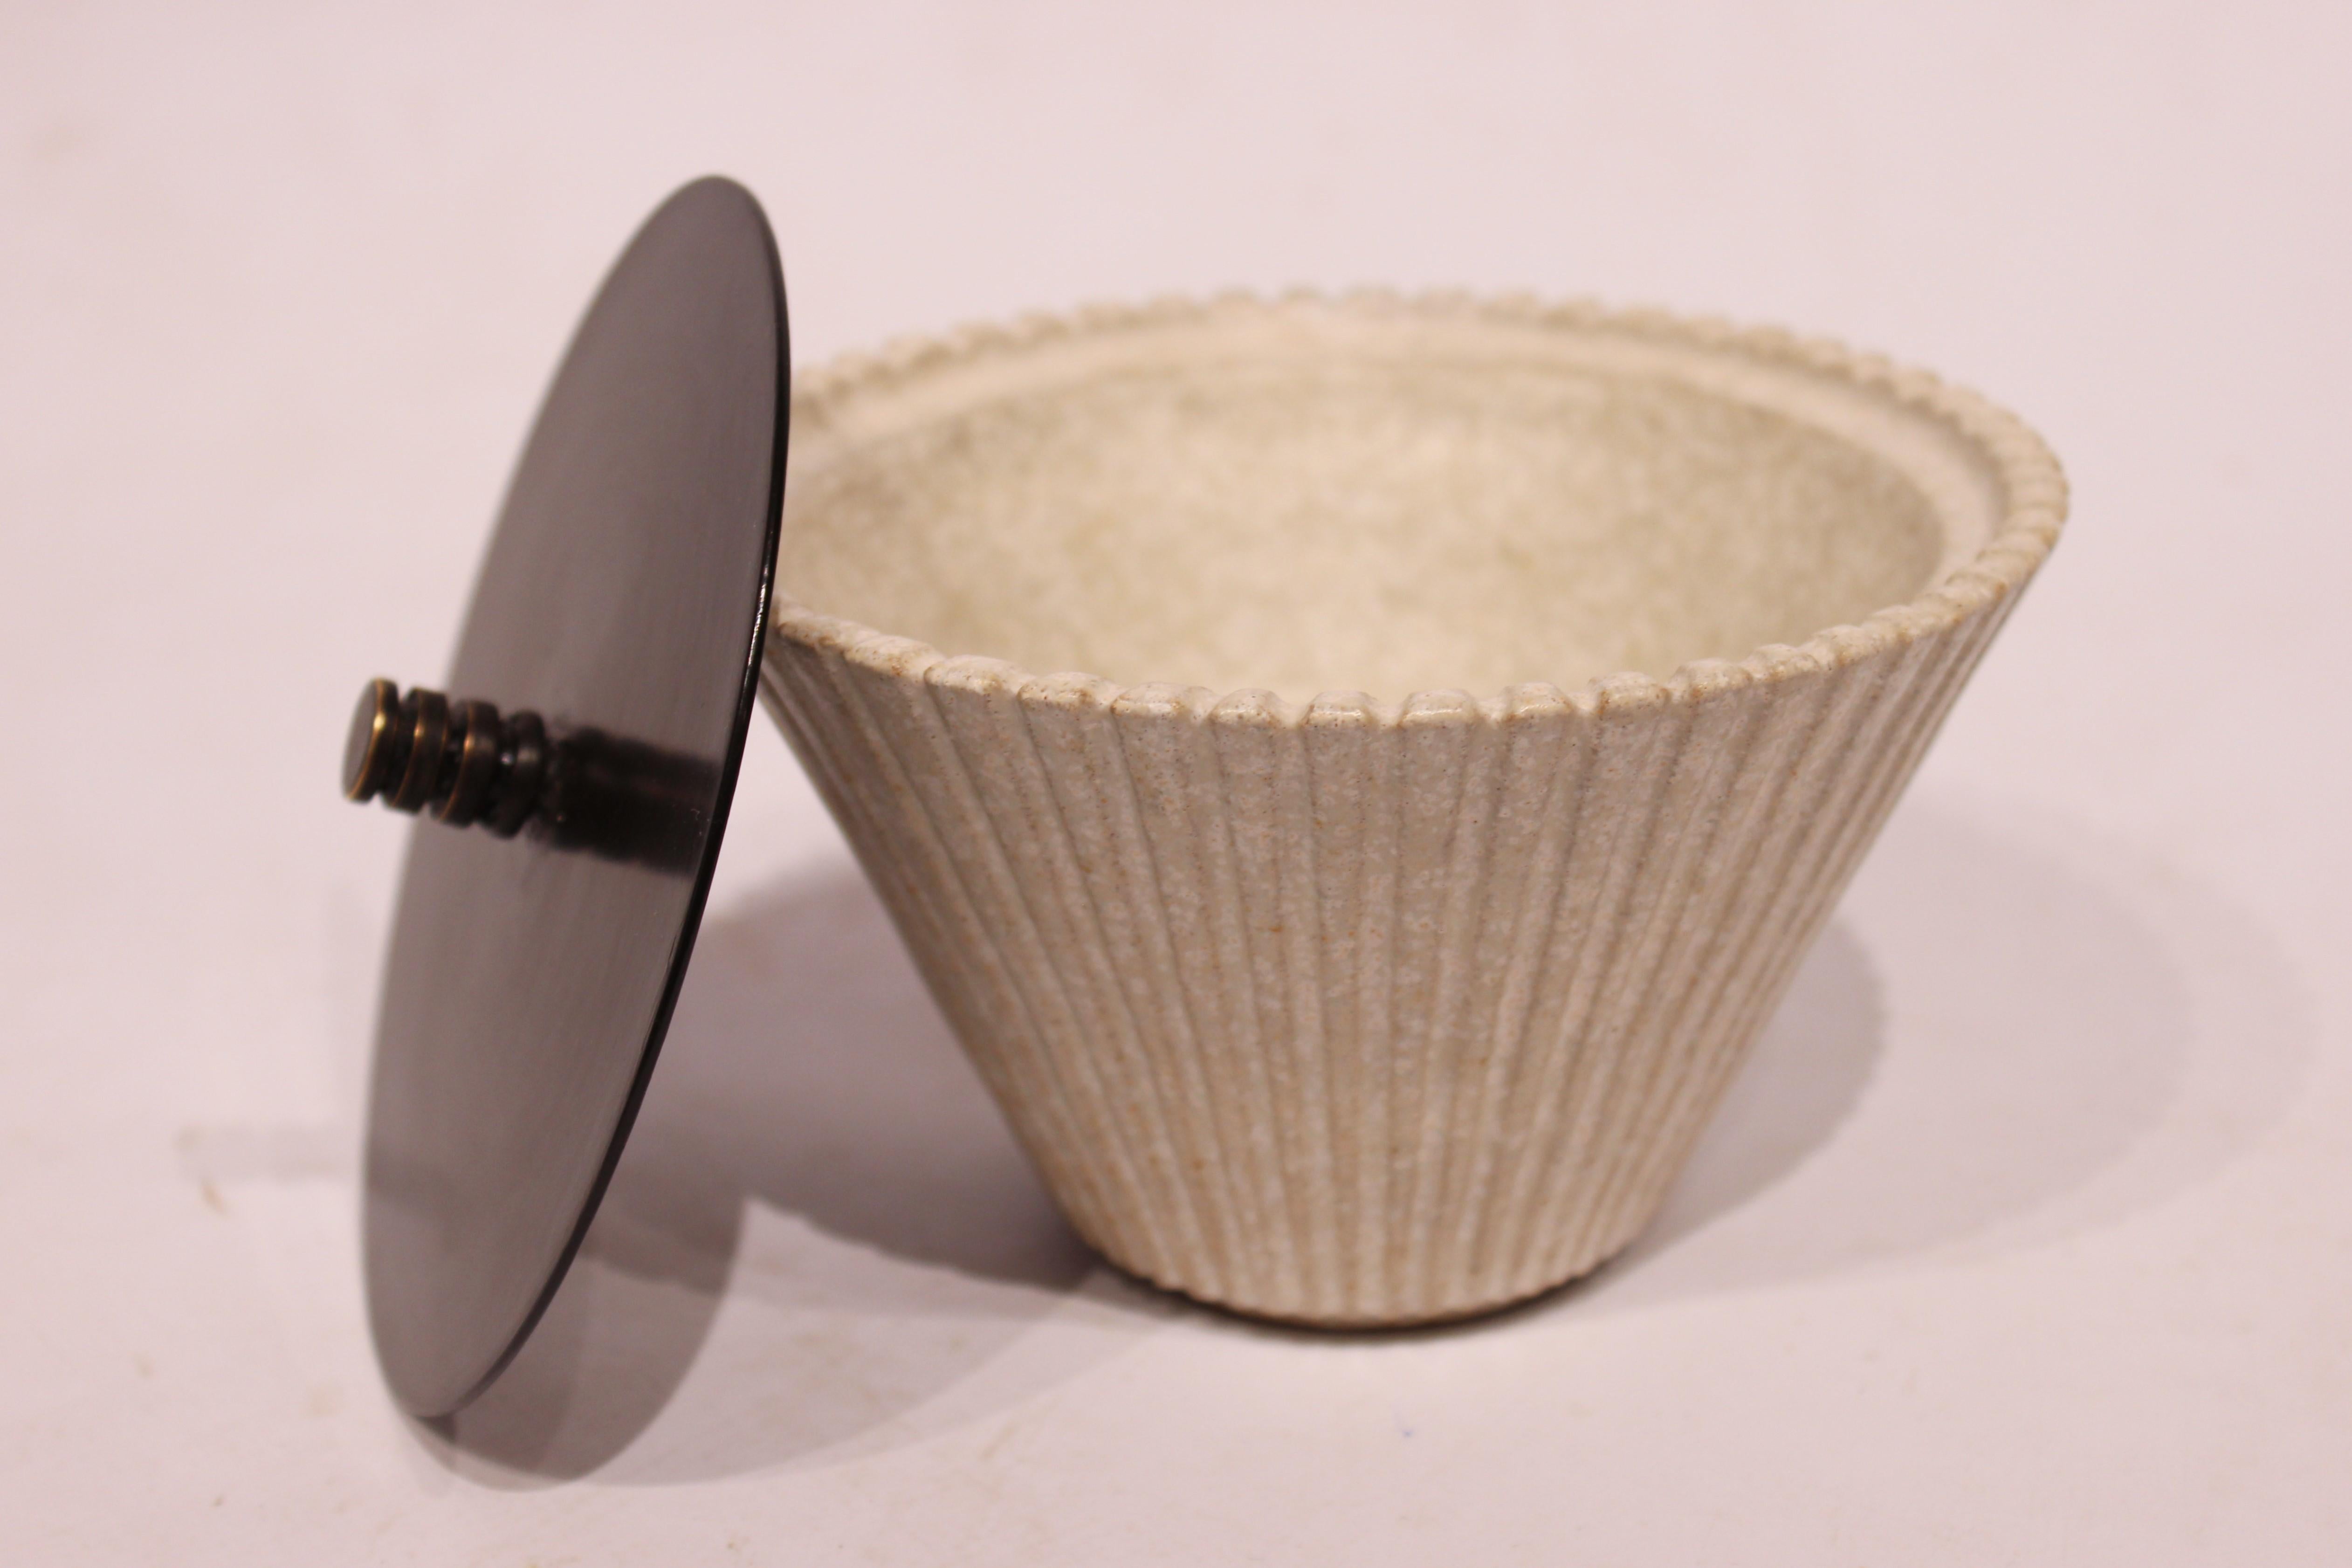 Scandinavian Modern Ceramic Bowl with Lid of Bronze by Arne Bang, No. 119, from the 1930s